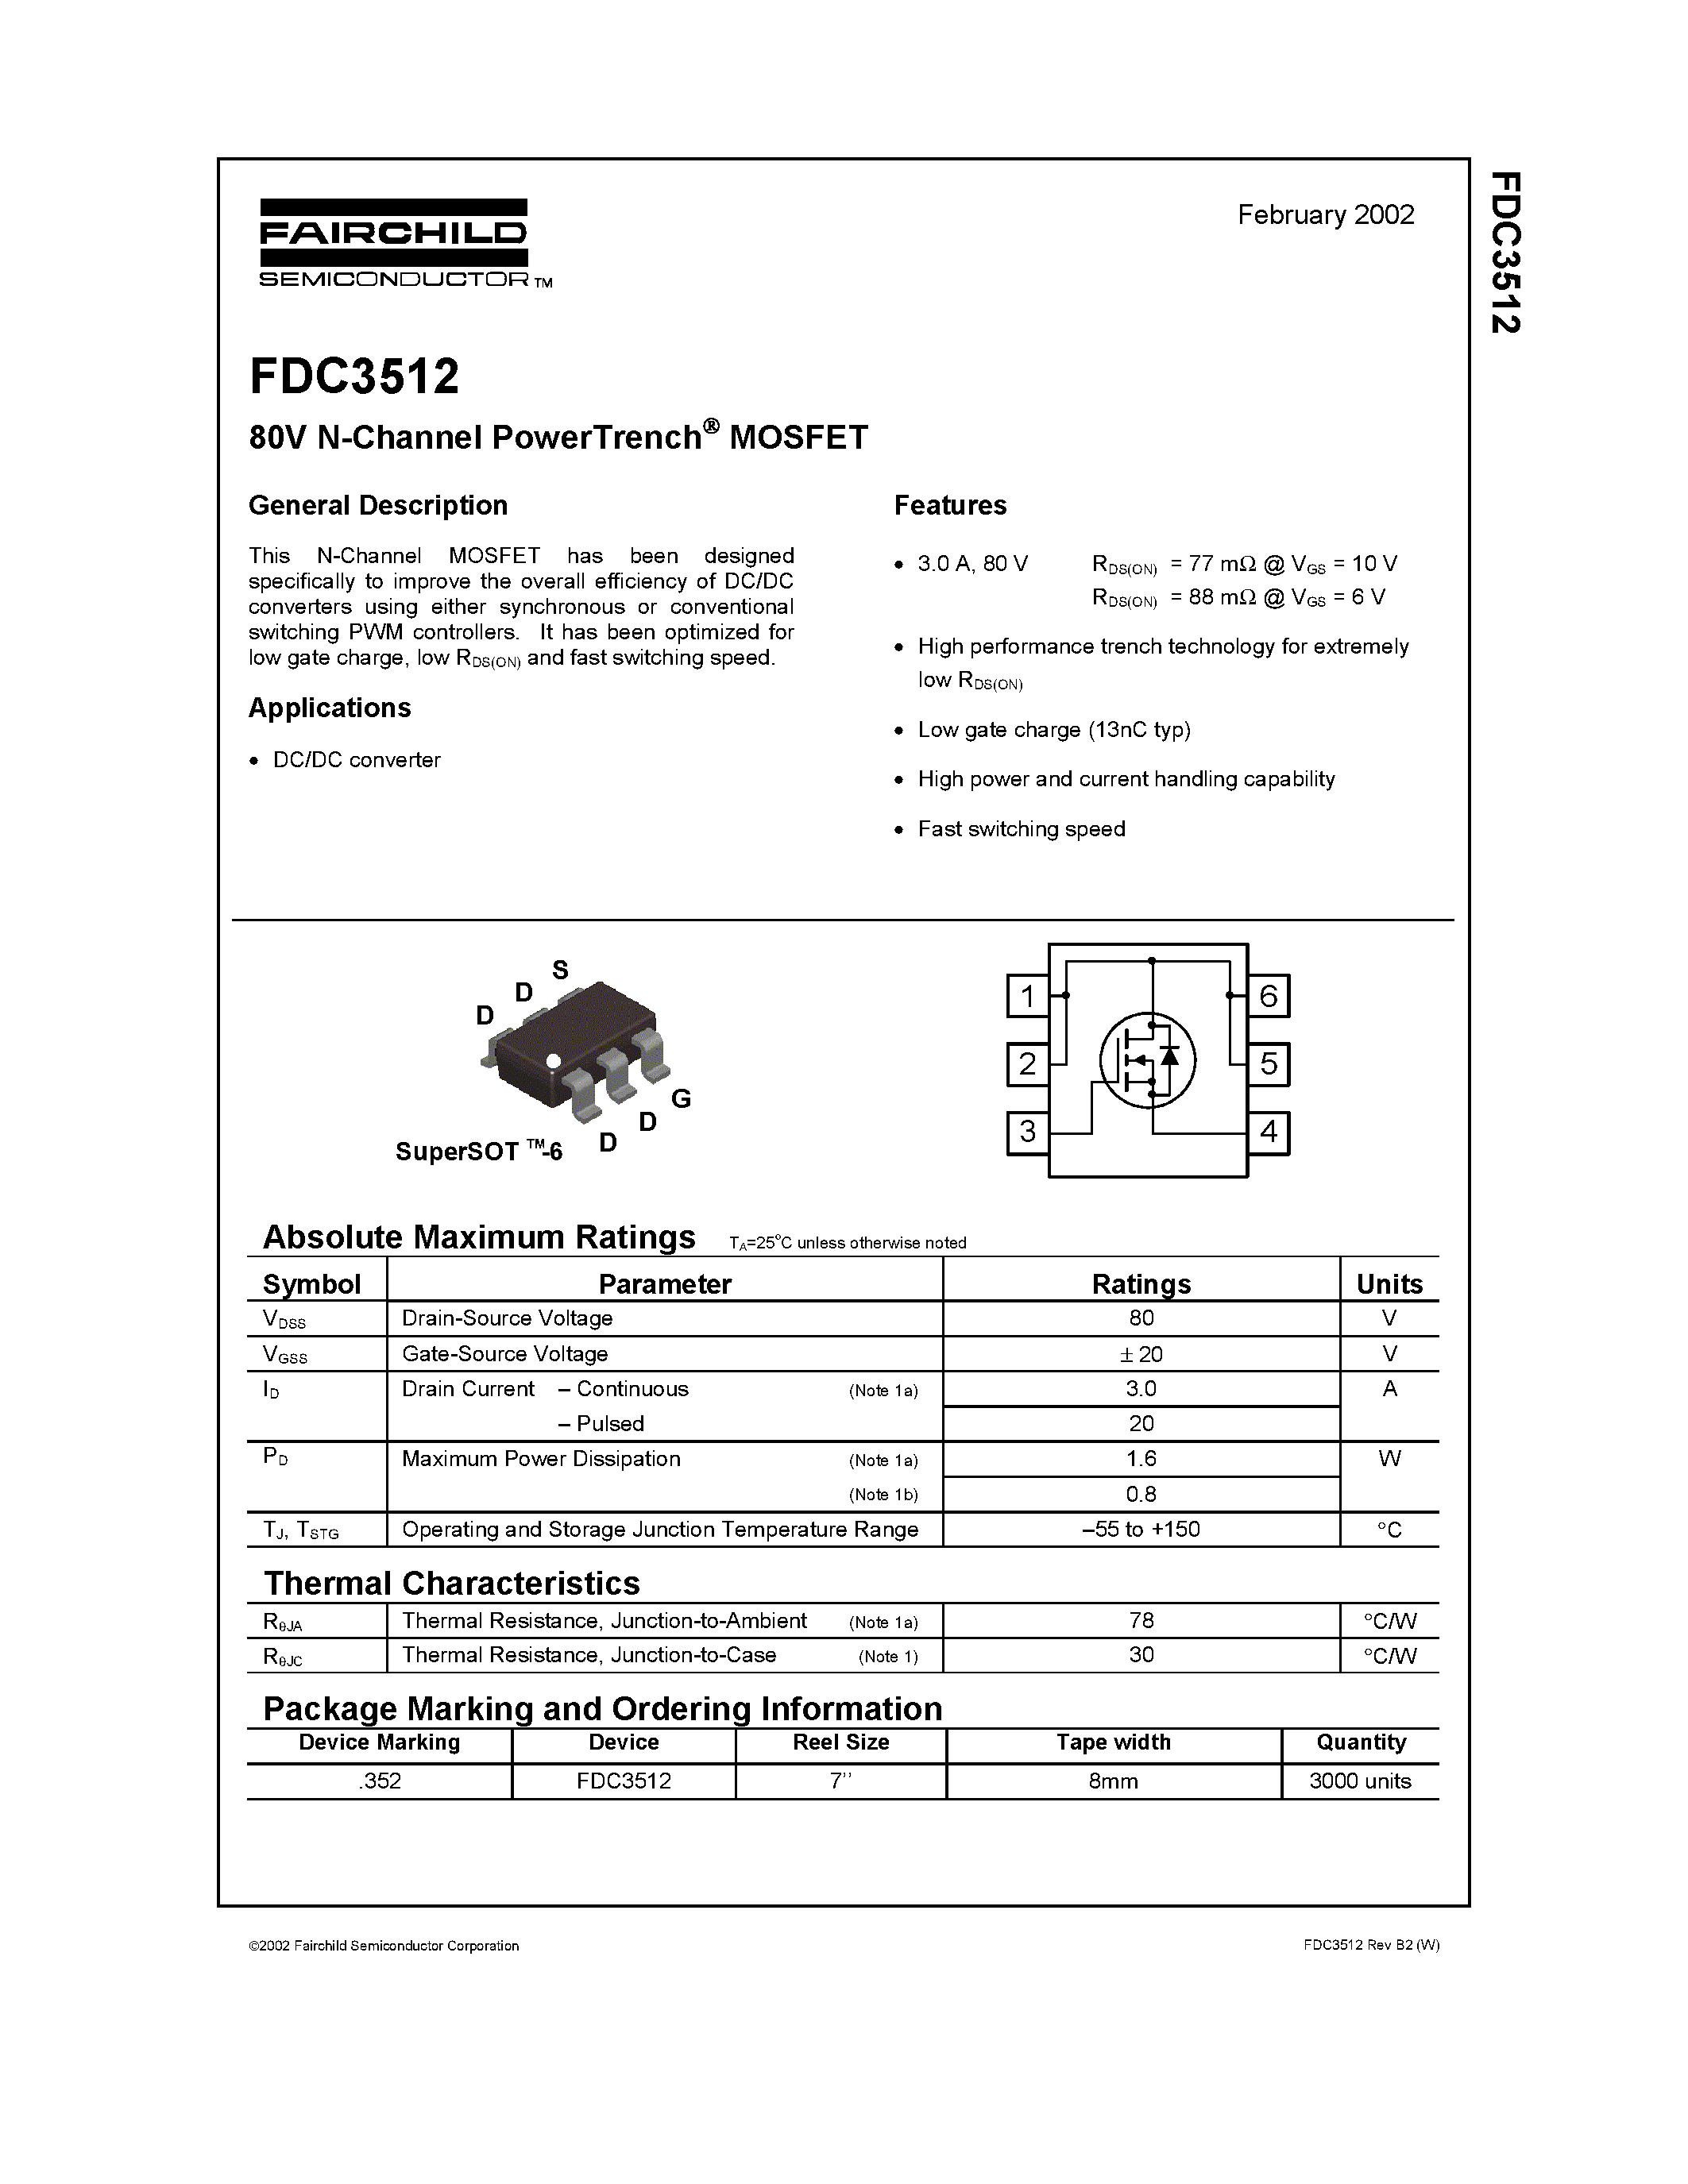 Даташит FDC3512 - 80V N-Channel PowerTrench MOSFET страница 1